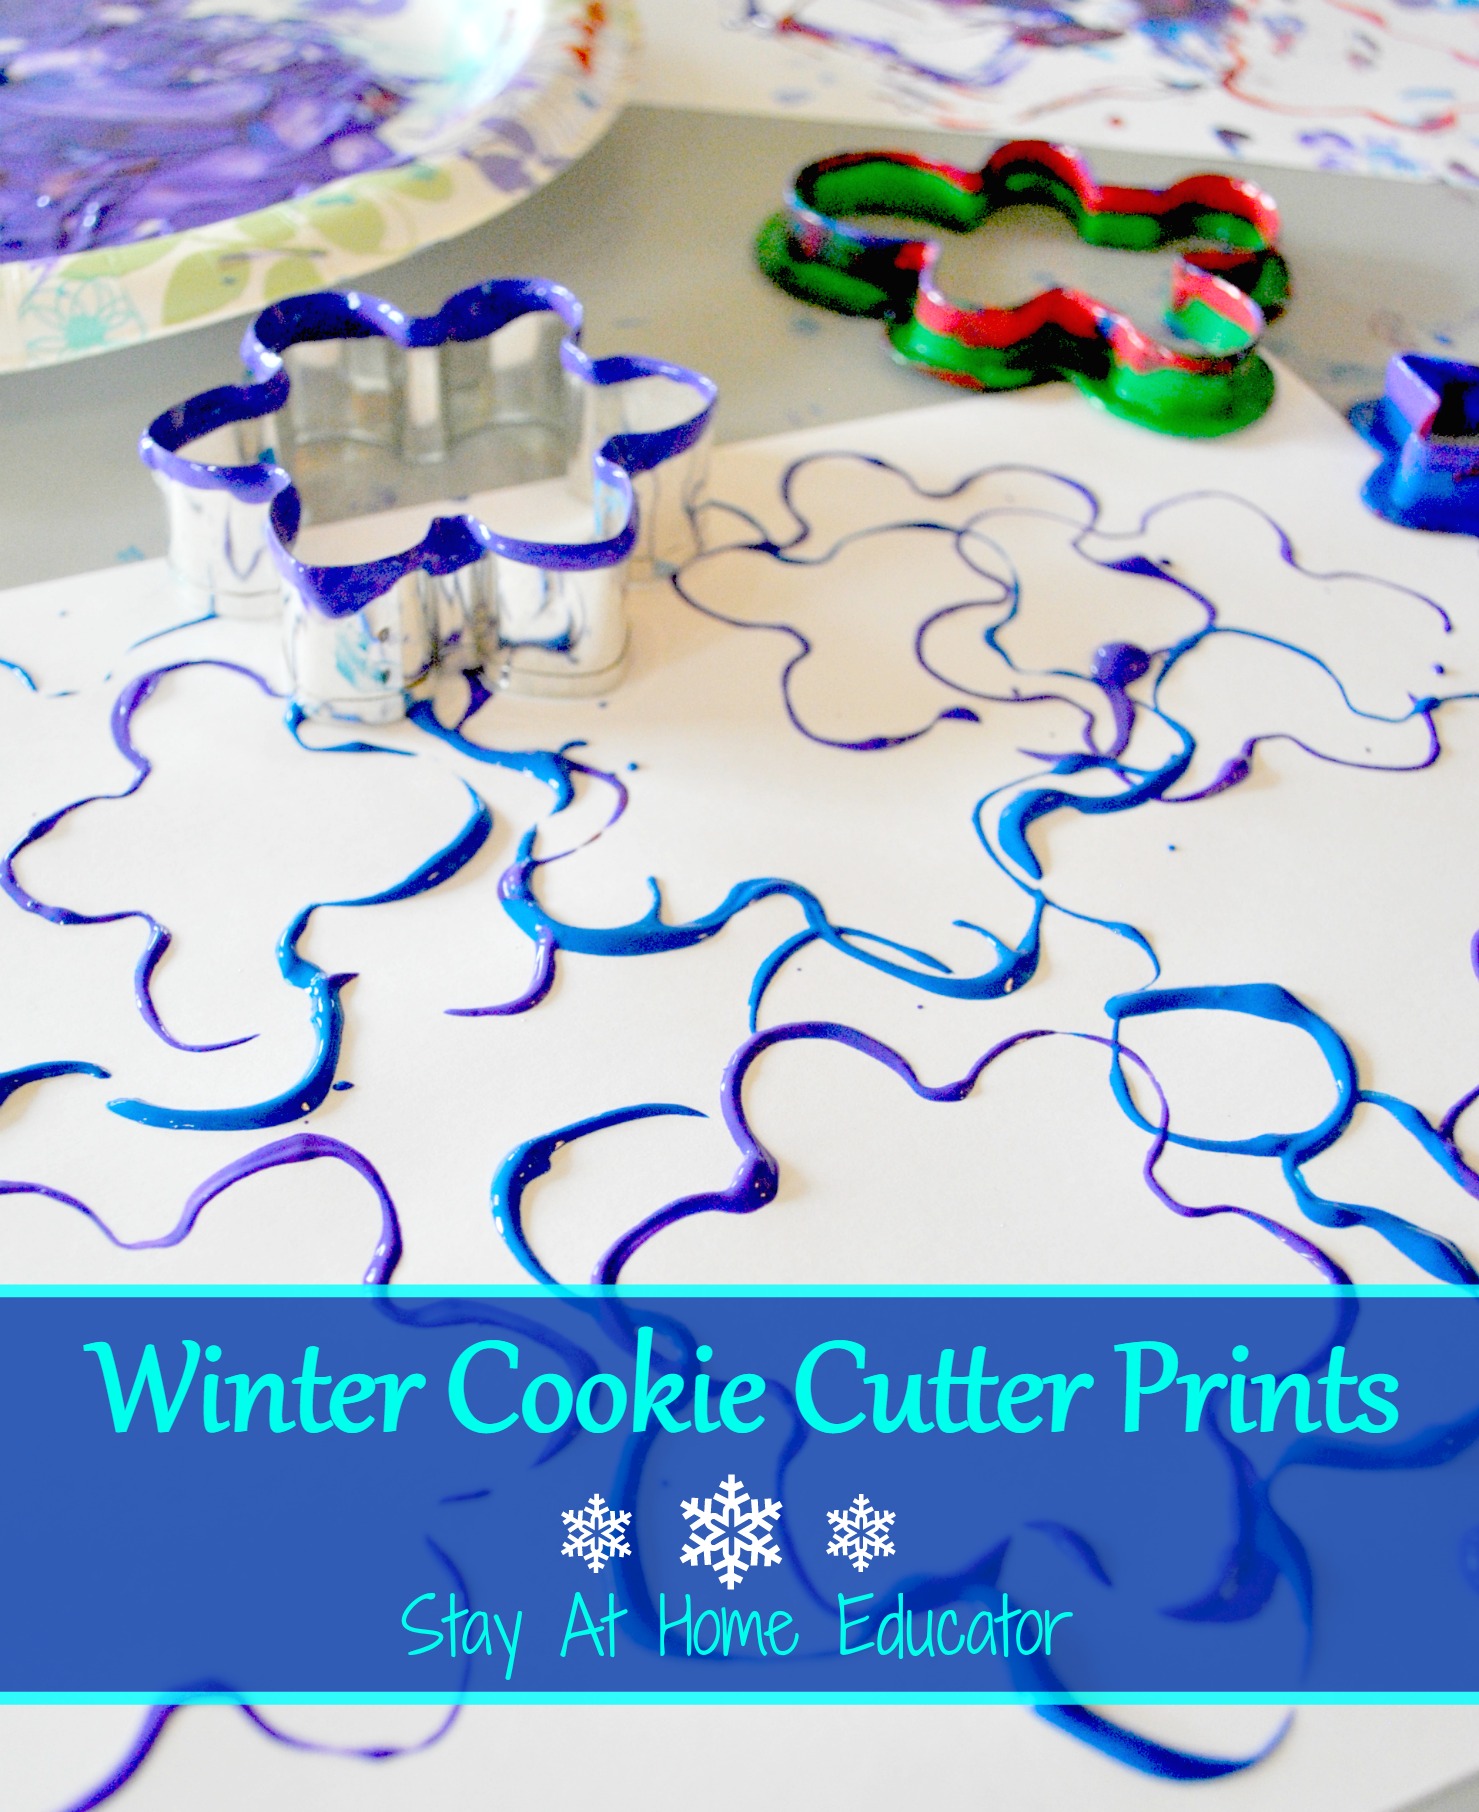 Winter cookie cutter prints - Stay At Home Educator